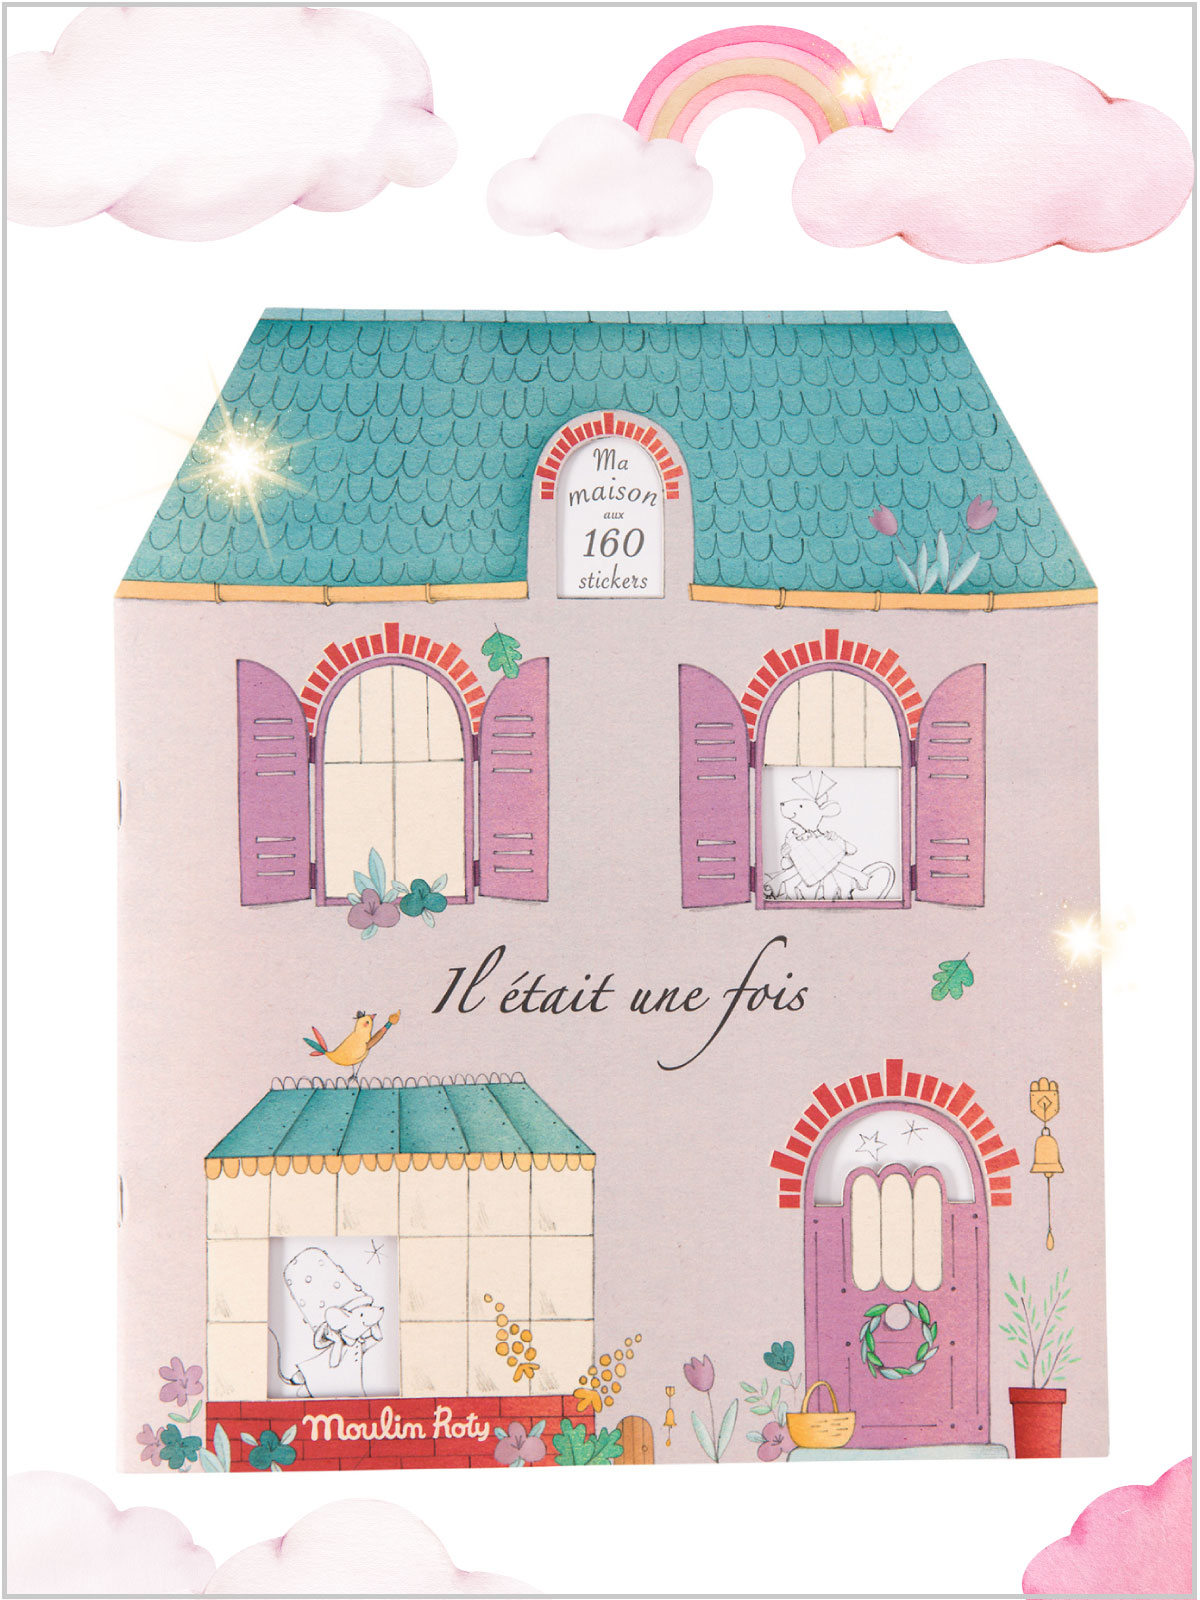 frederickandsophie-kids-toys-moulin-roty-iletaitunefois_coloring_book_fairy_tale